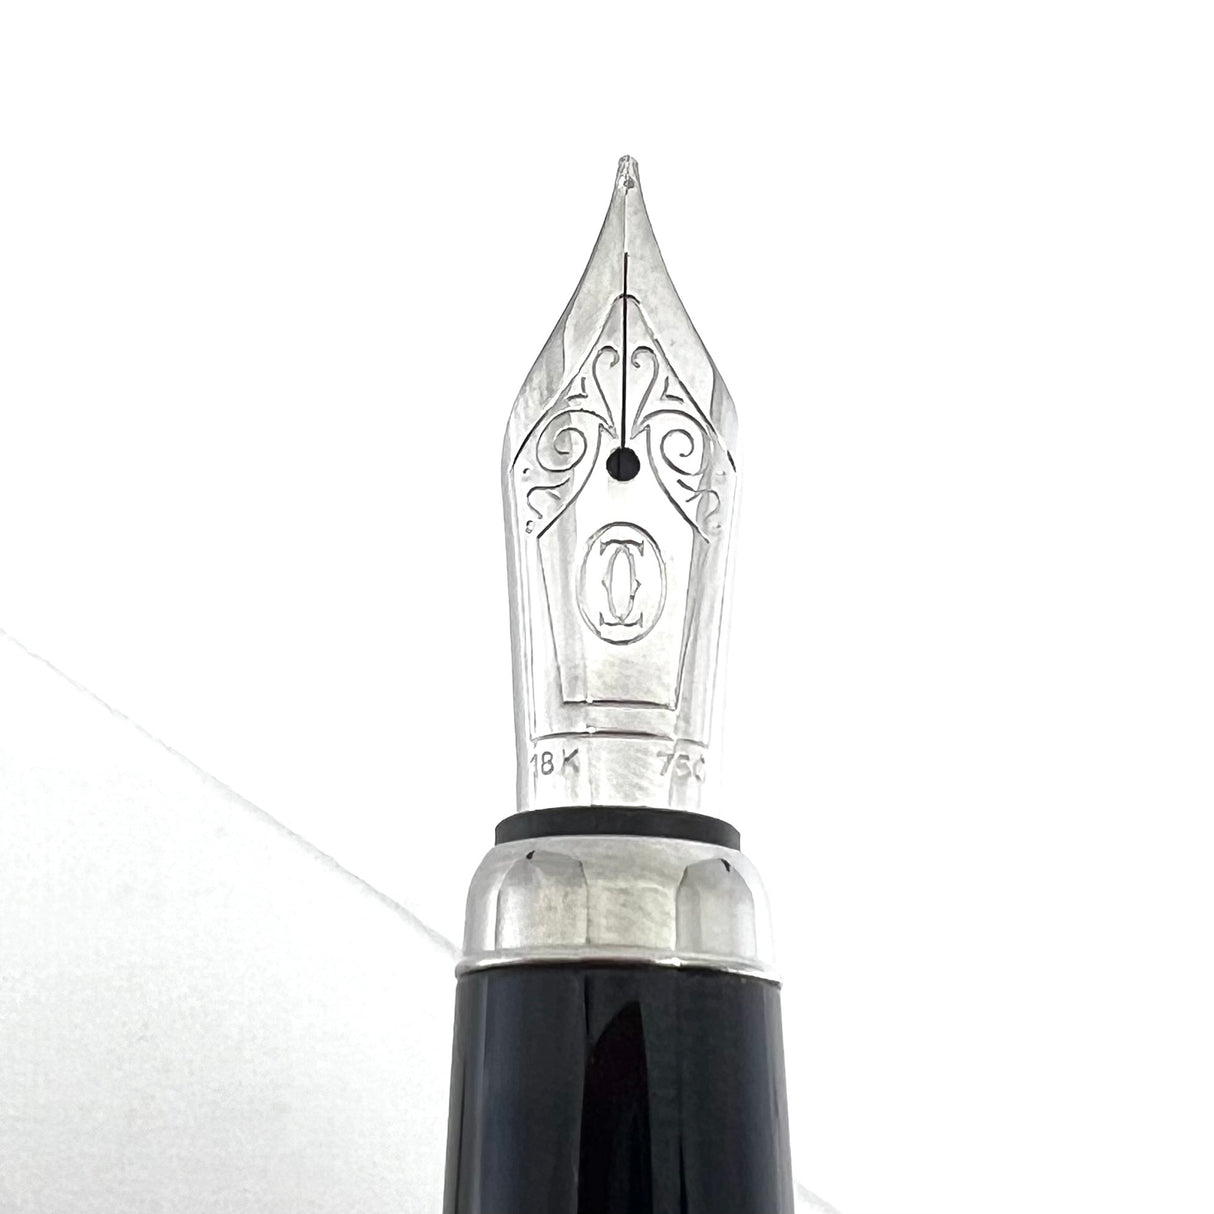 Cartier Dandy Platinum Plated & Black Lacquered Striped Limited Edition Fountain Pen